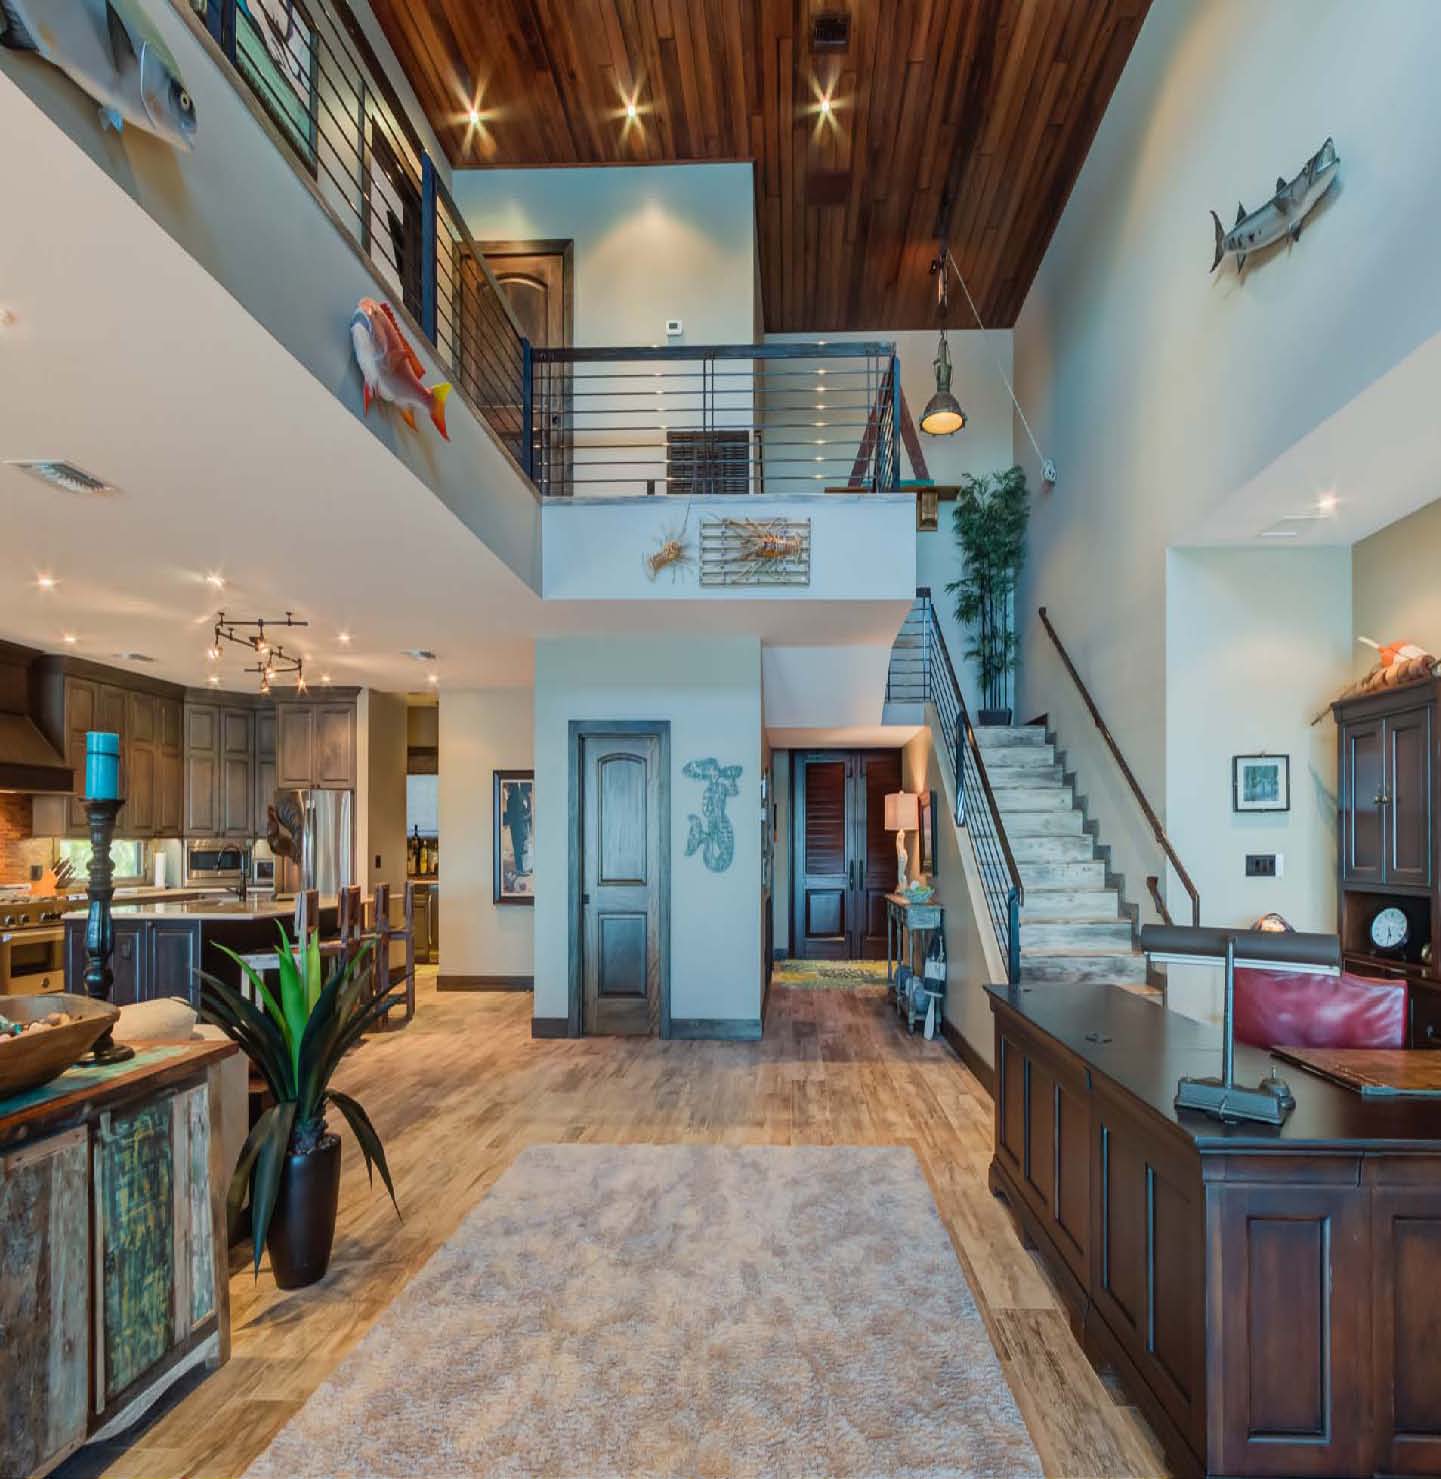 A large open floor plan with a staircase and kitchen.